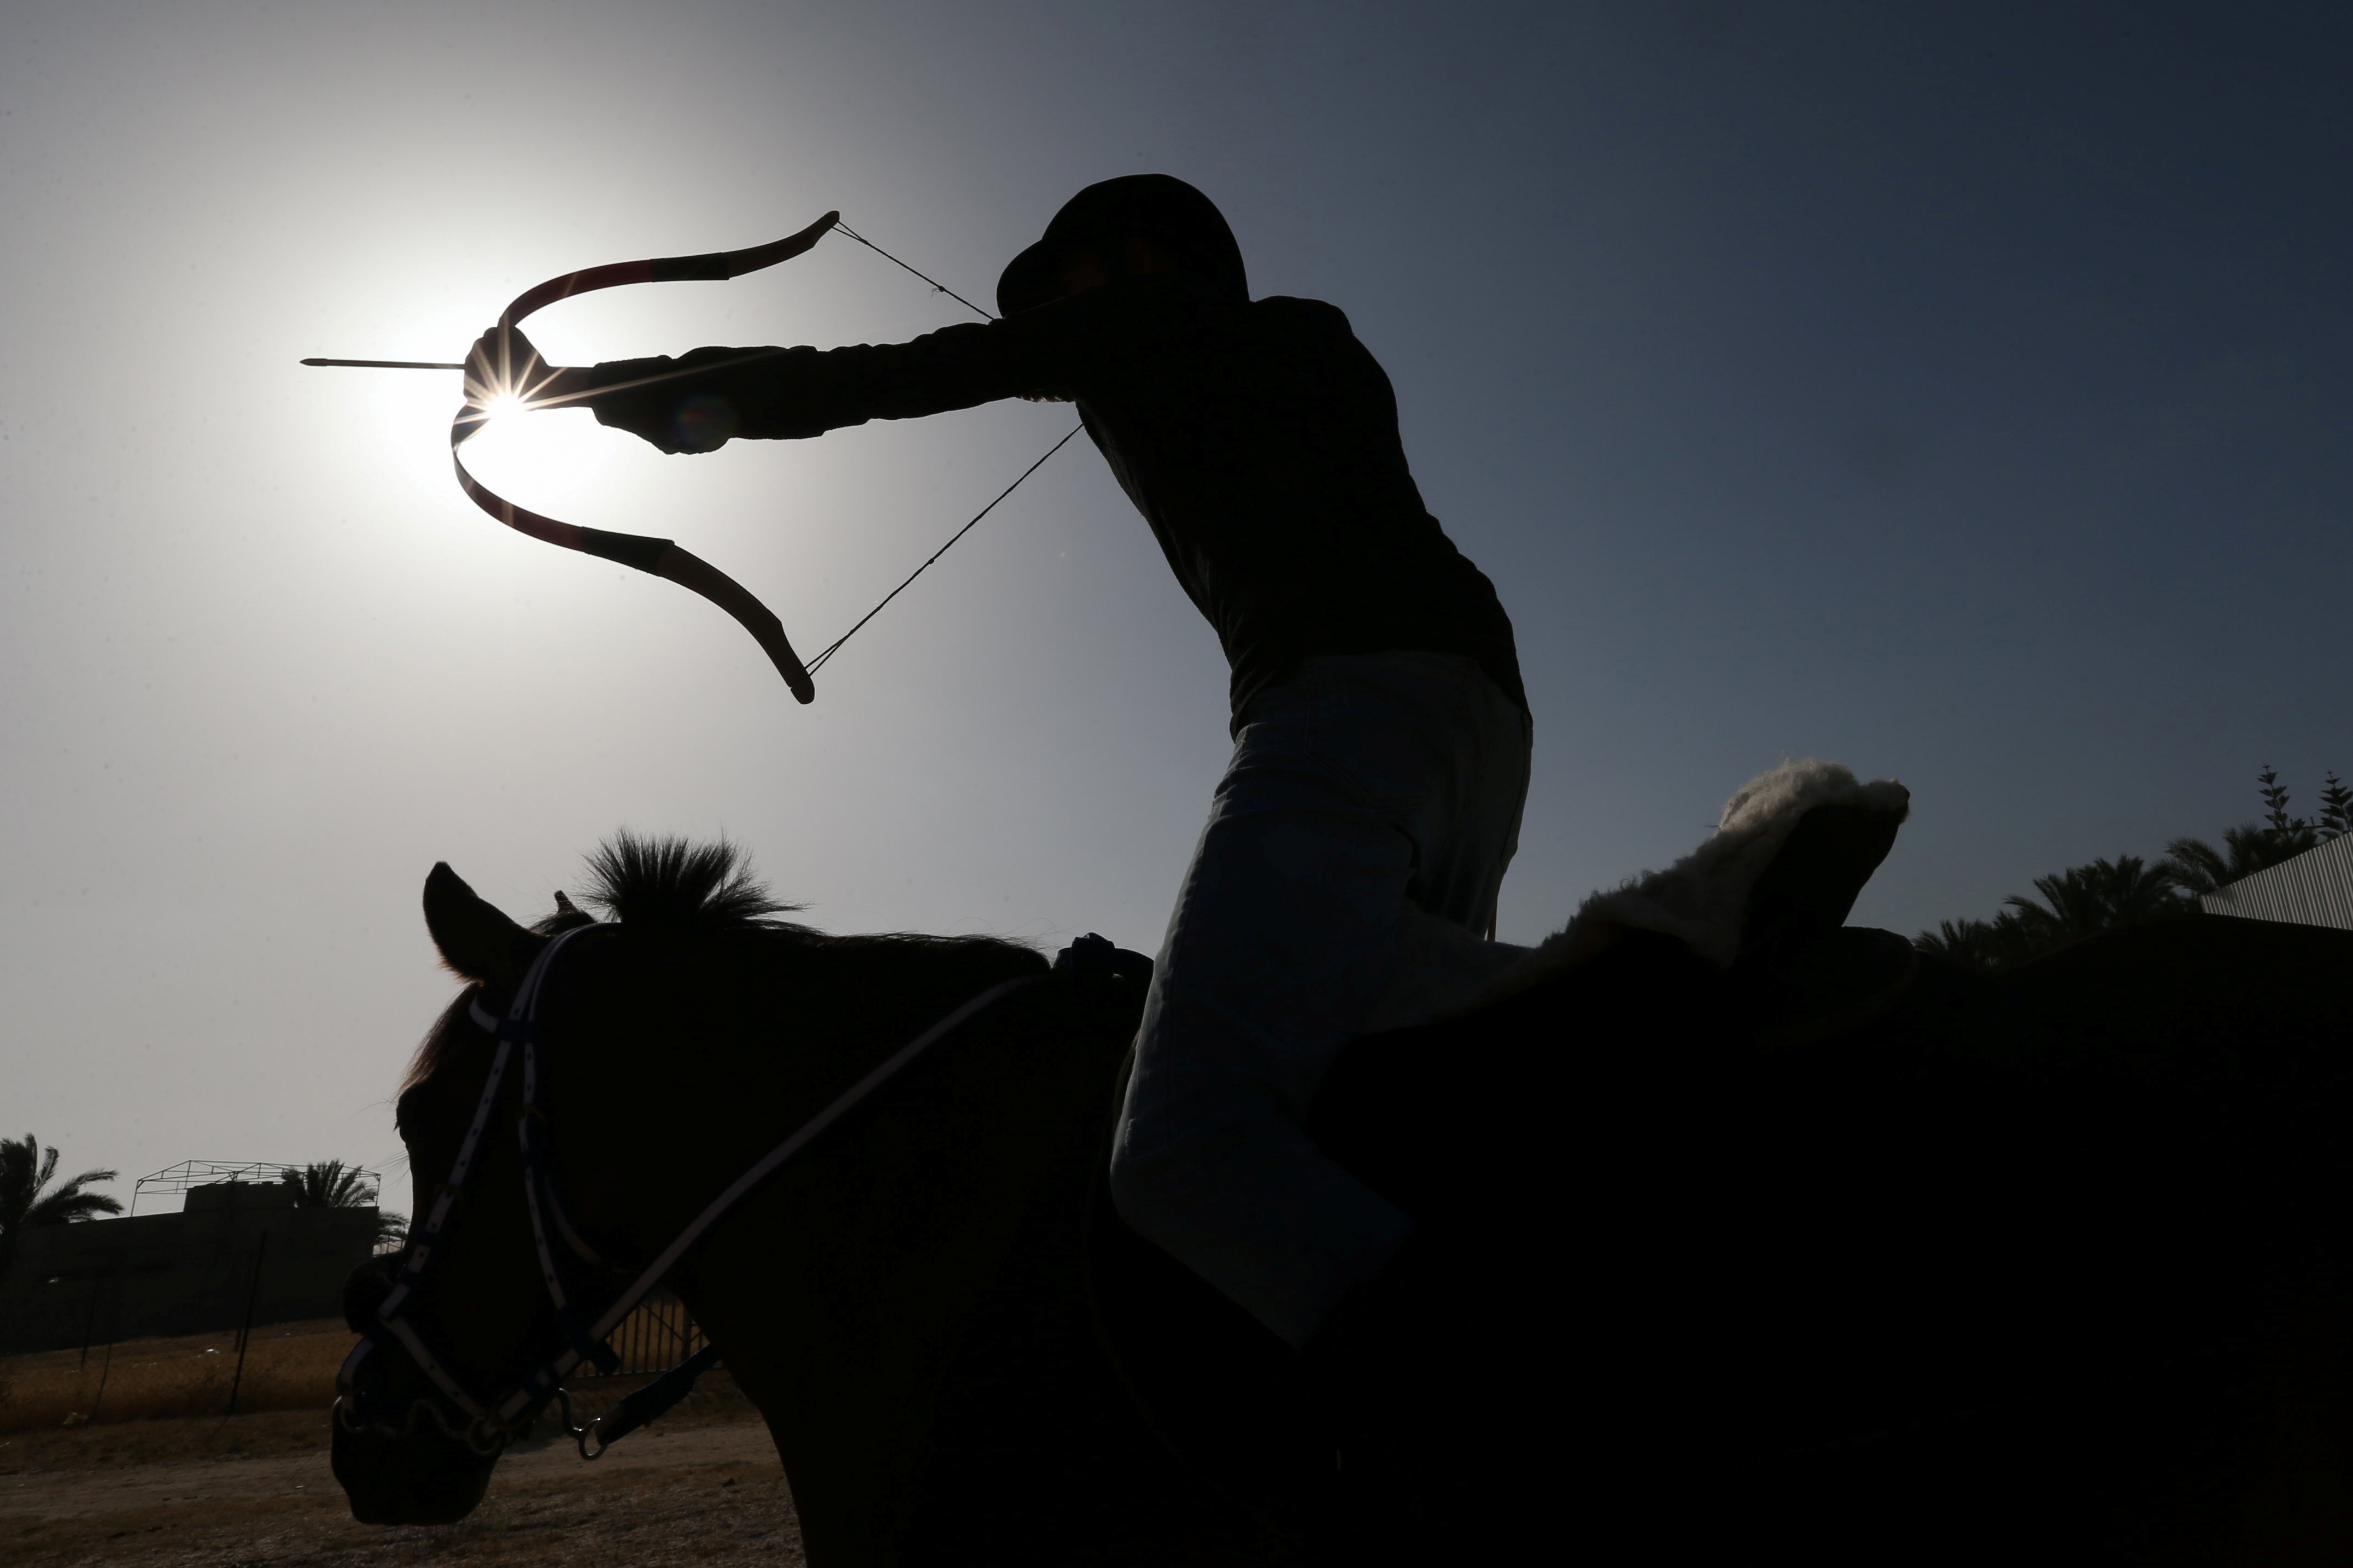 First team of mounted archers takes aim in Gaza